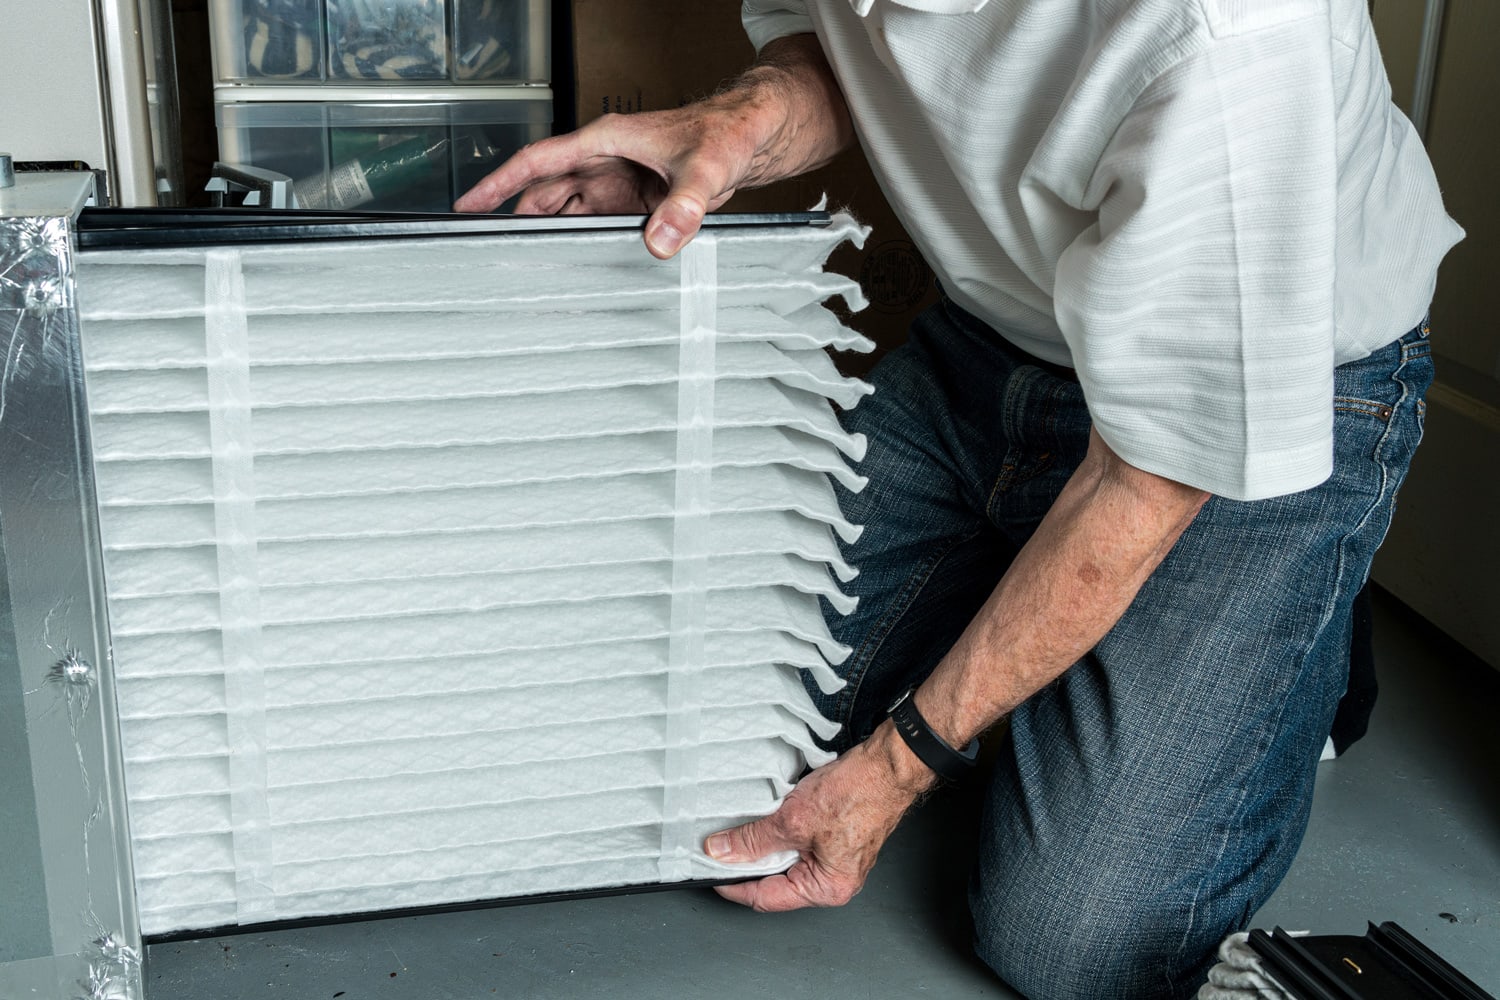 Senior caucasian man checking a clean folded air filter in the HVAC furnace system in basement of home